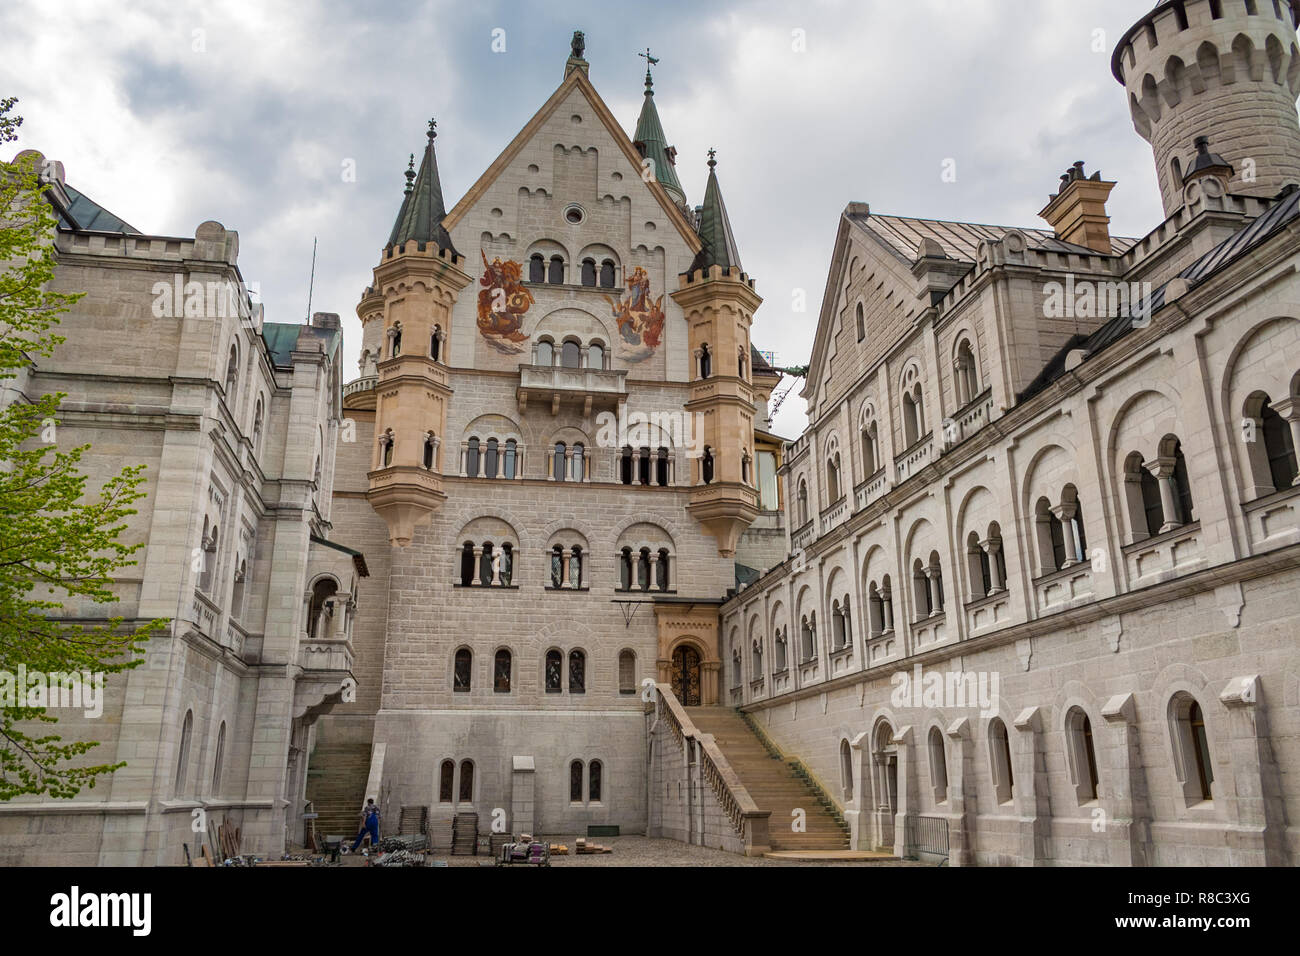 Nice view of the upper courtyard level of the famous Neuschwanstein Castle. On the left is the Bower, in the centre is the palace with two big... Stock Photo